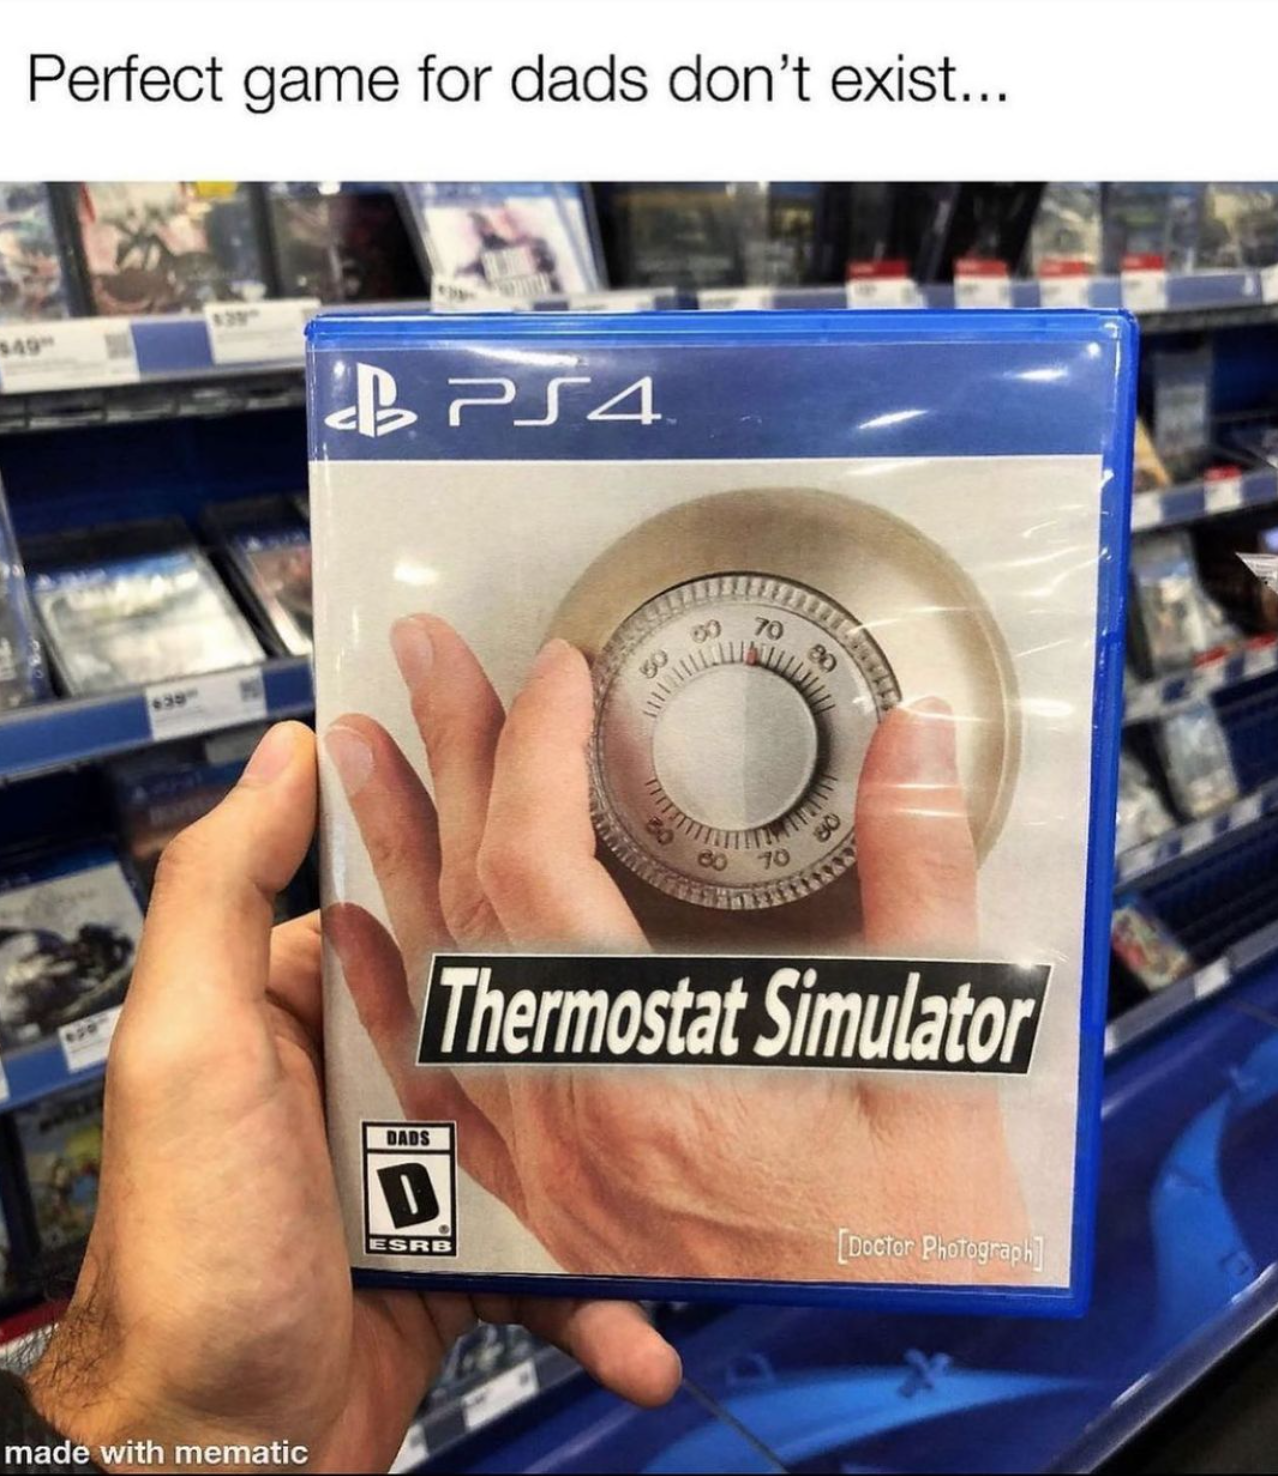 funny gaming memes - meme thermostat simulator dad - Perfect game for dads don't exist... Cb PS4 To Thermostat Simulator D Eerd necter Platone made with mematic